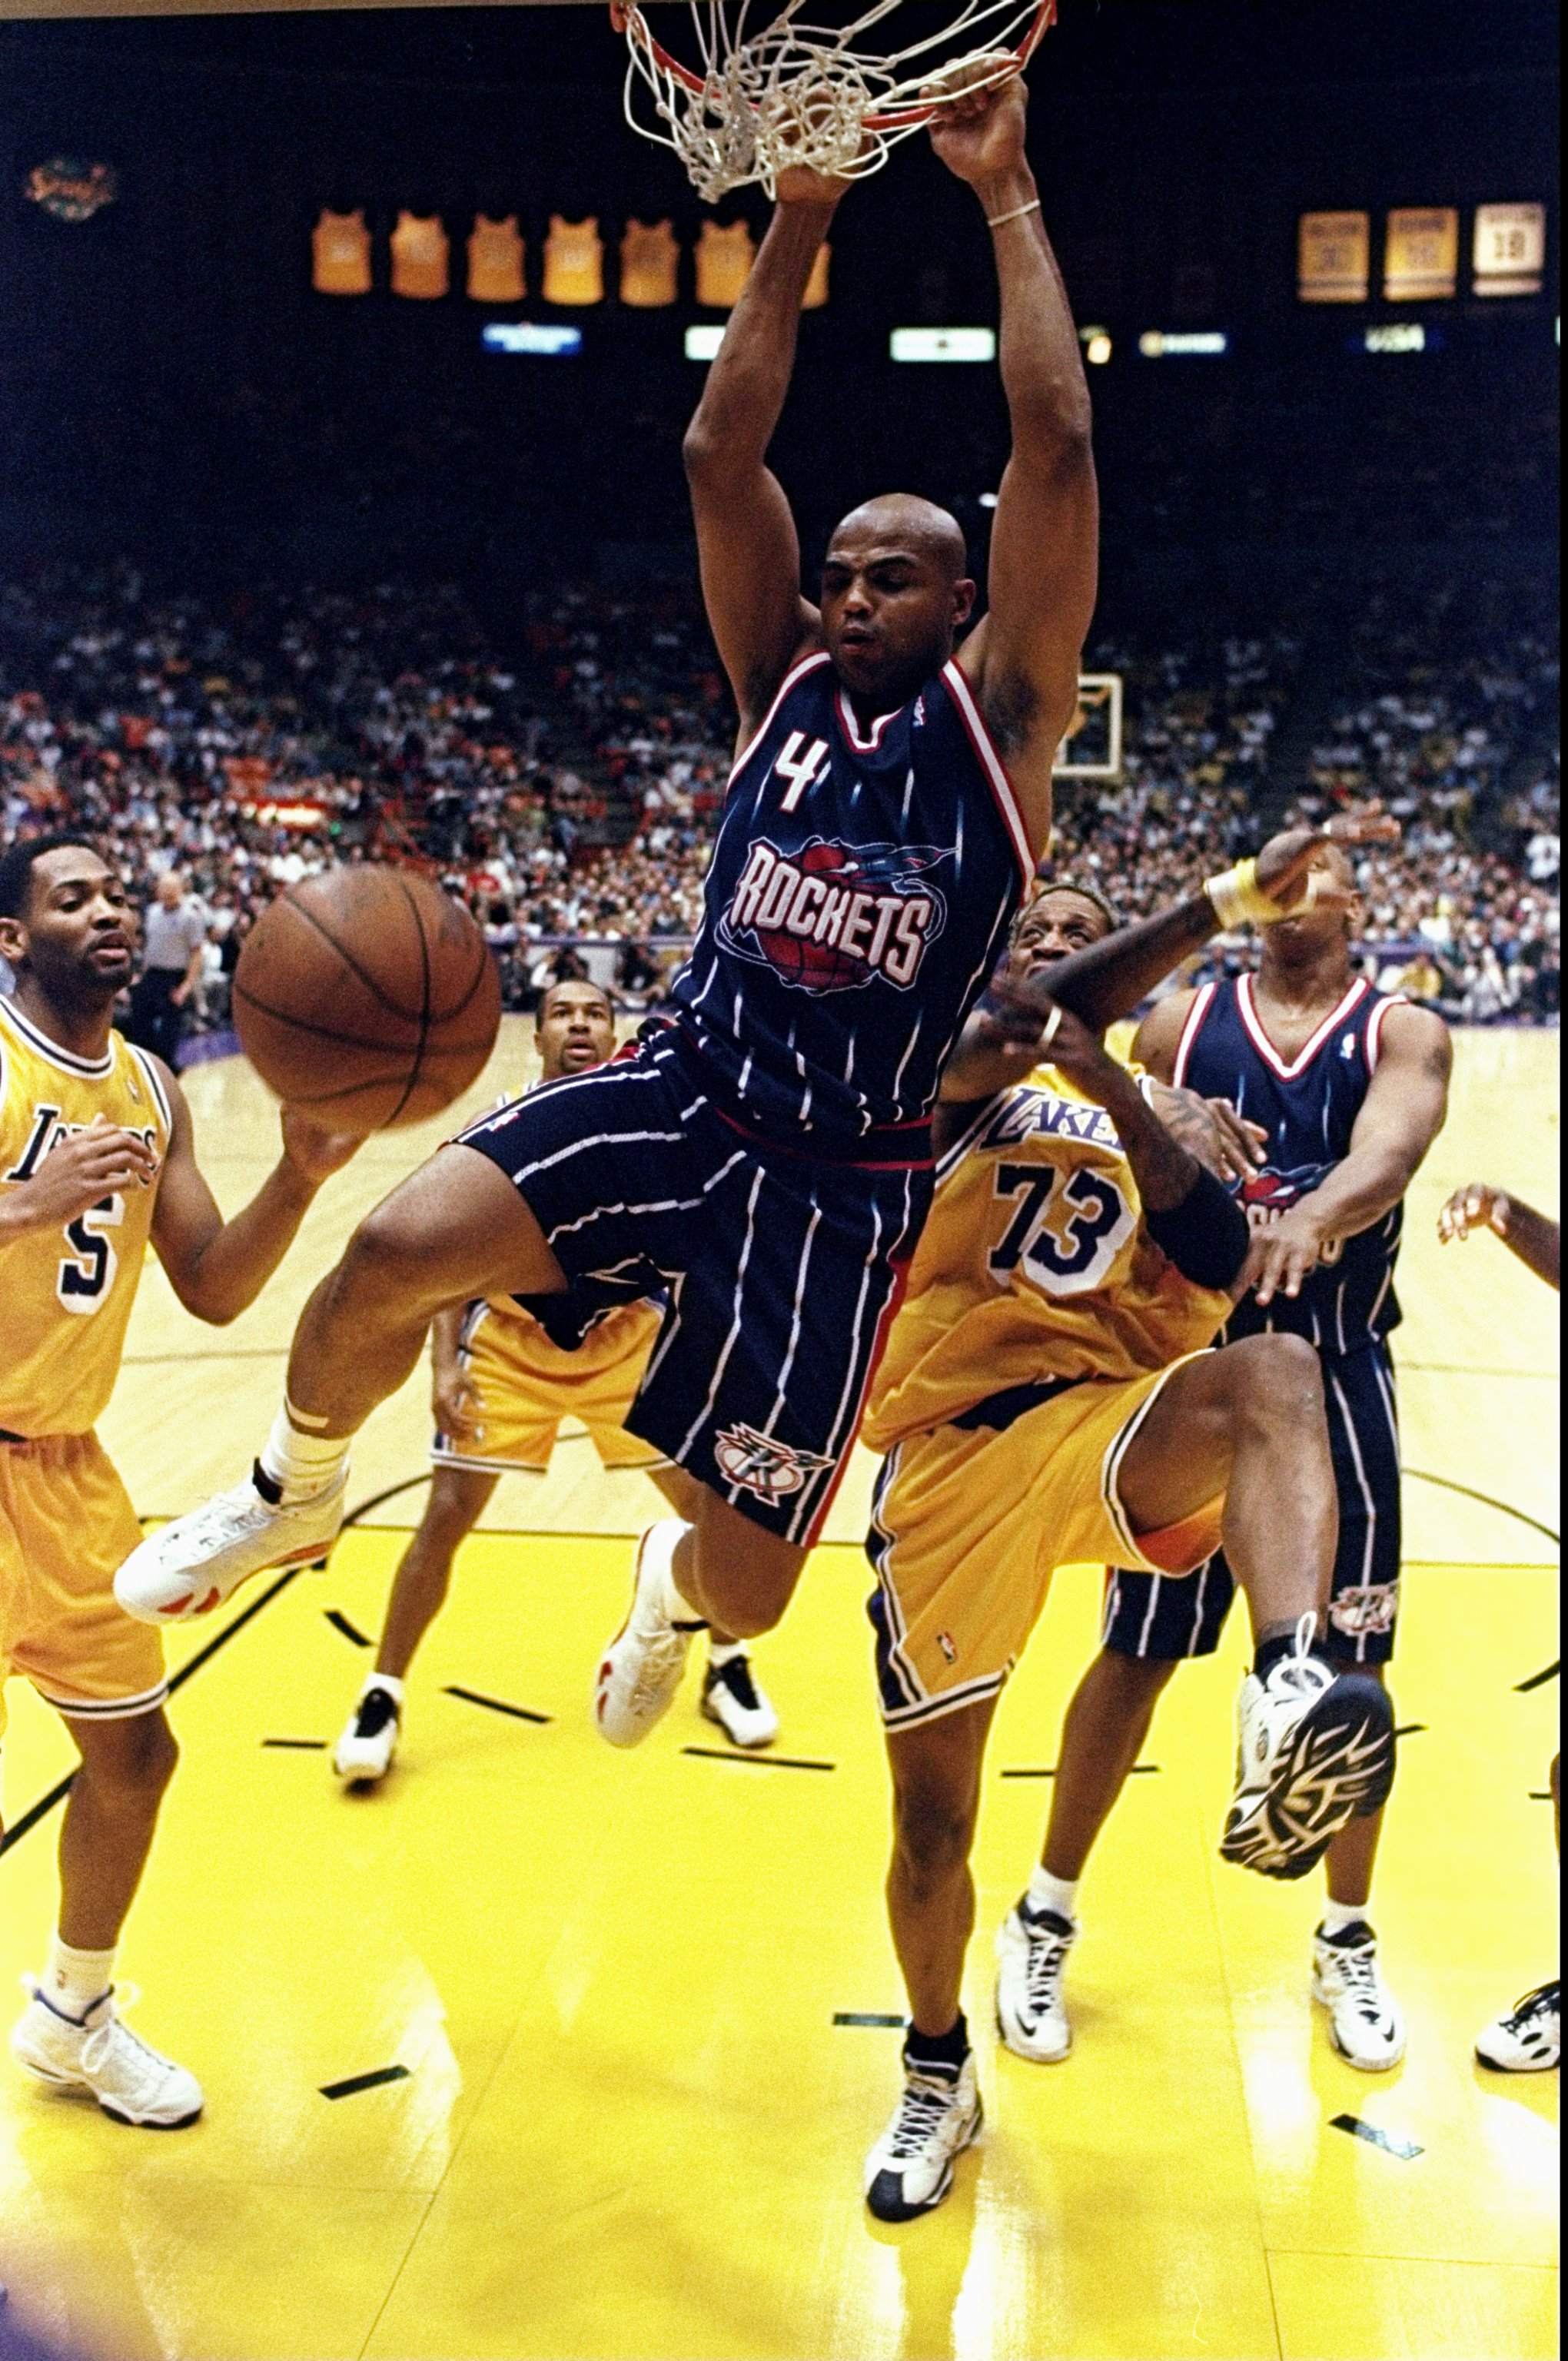 28 Feb 1999: Charles Barkley #4 of the Houston Rockets hangs from the hoop during the game against the Los Angeles Lakers at the Great Western Forum in Inglewood, California. The Lakers defeated the Rockets 106-90.    Mandatory Credit: Elsa Hasch  /Allspo